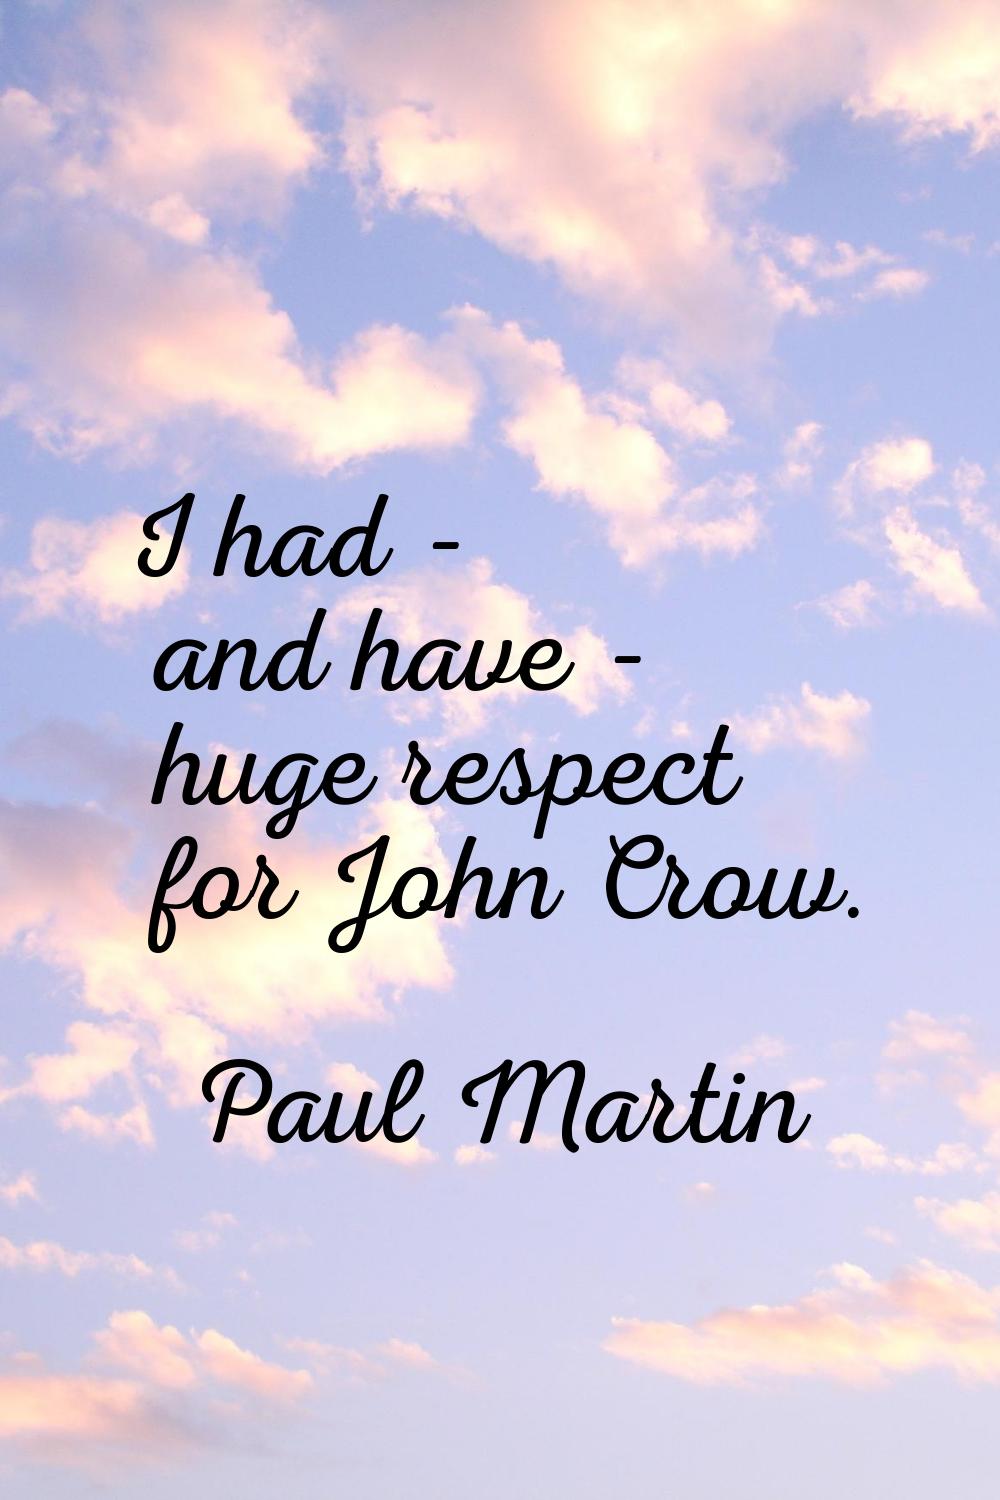 I had - and have - huge respect for John Crow.